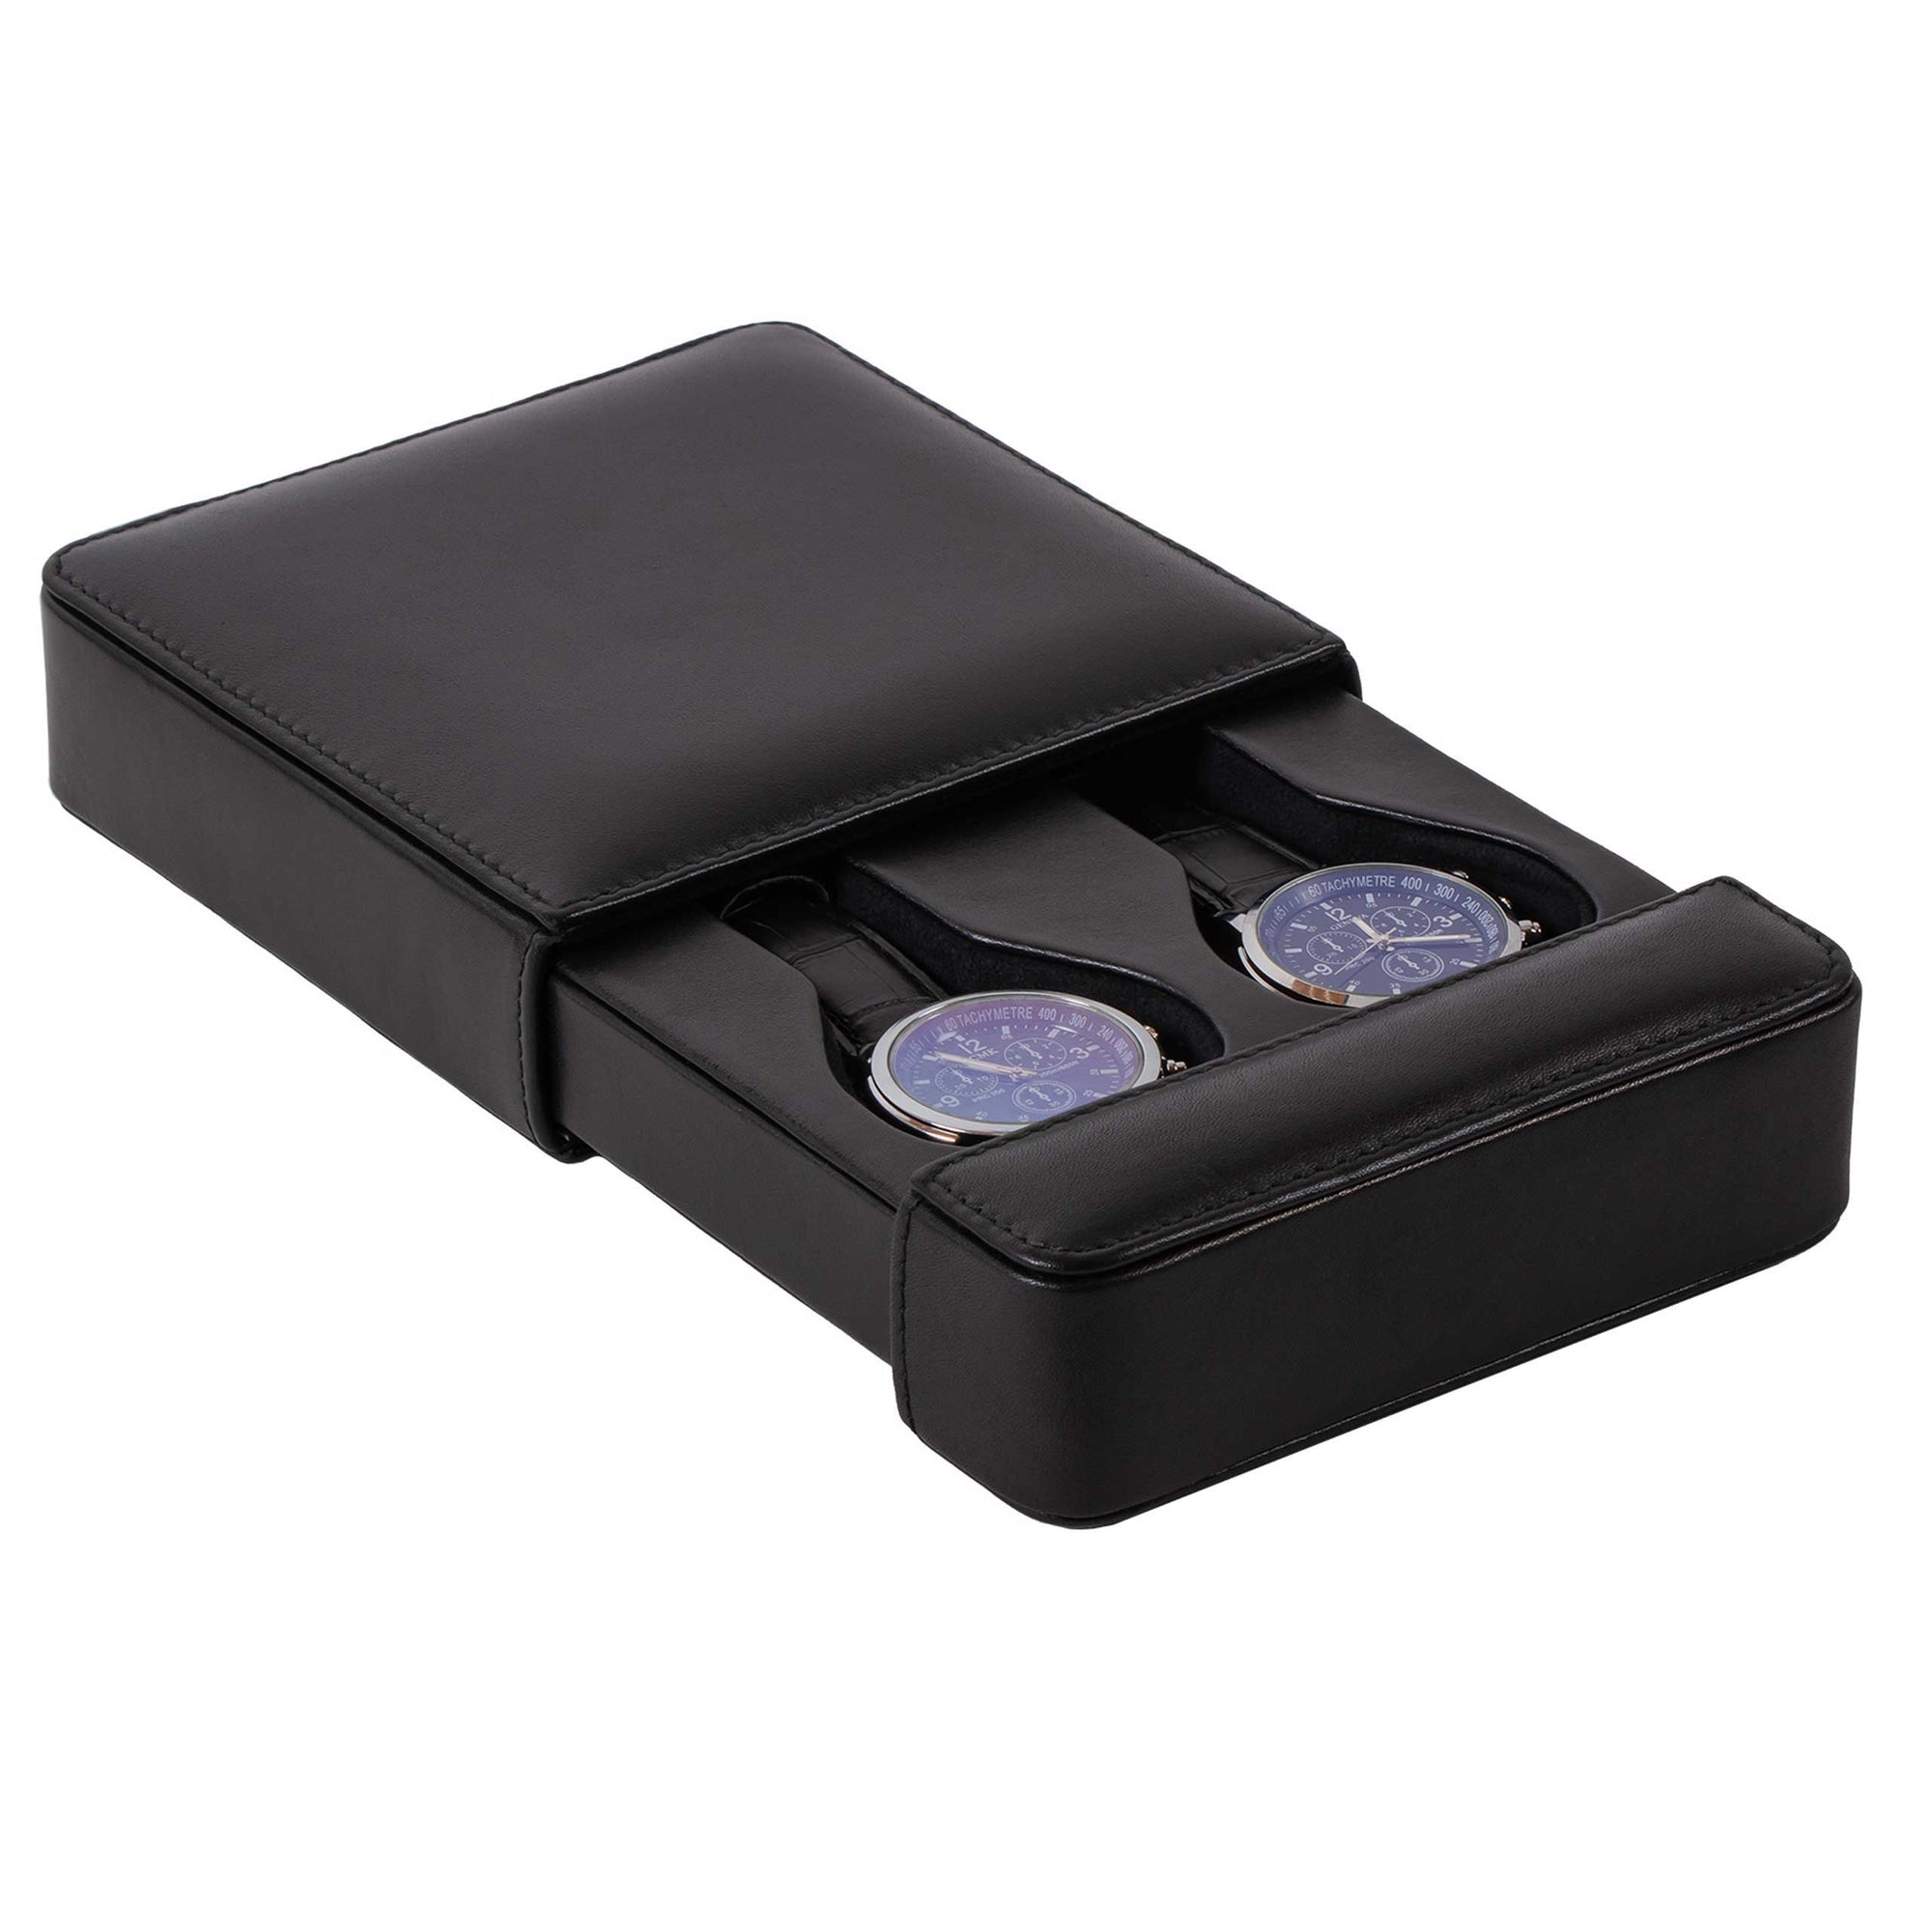 DiLoro Italian Leather Double Travel Watch Box Case Holder in Black - Open with 2 Men's Wrist Watches (not included)